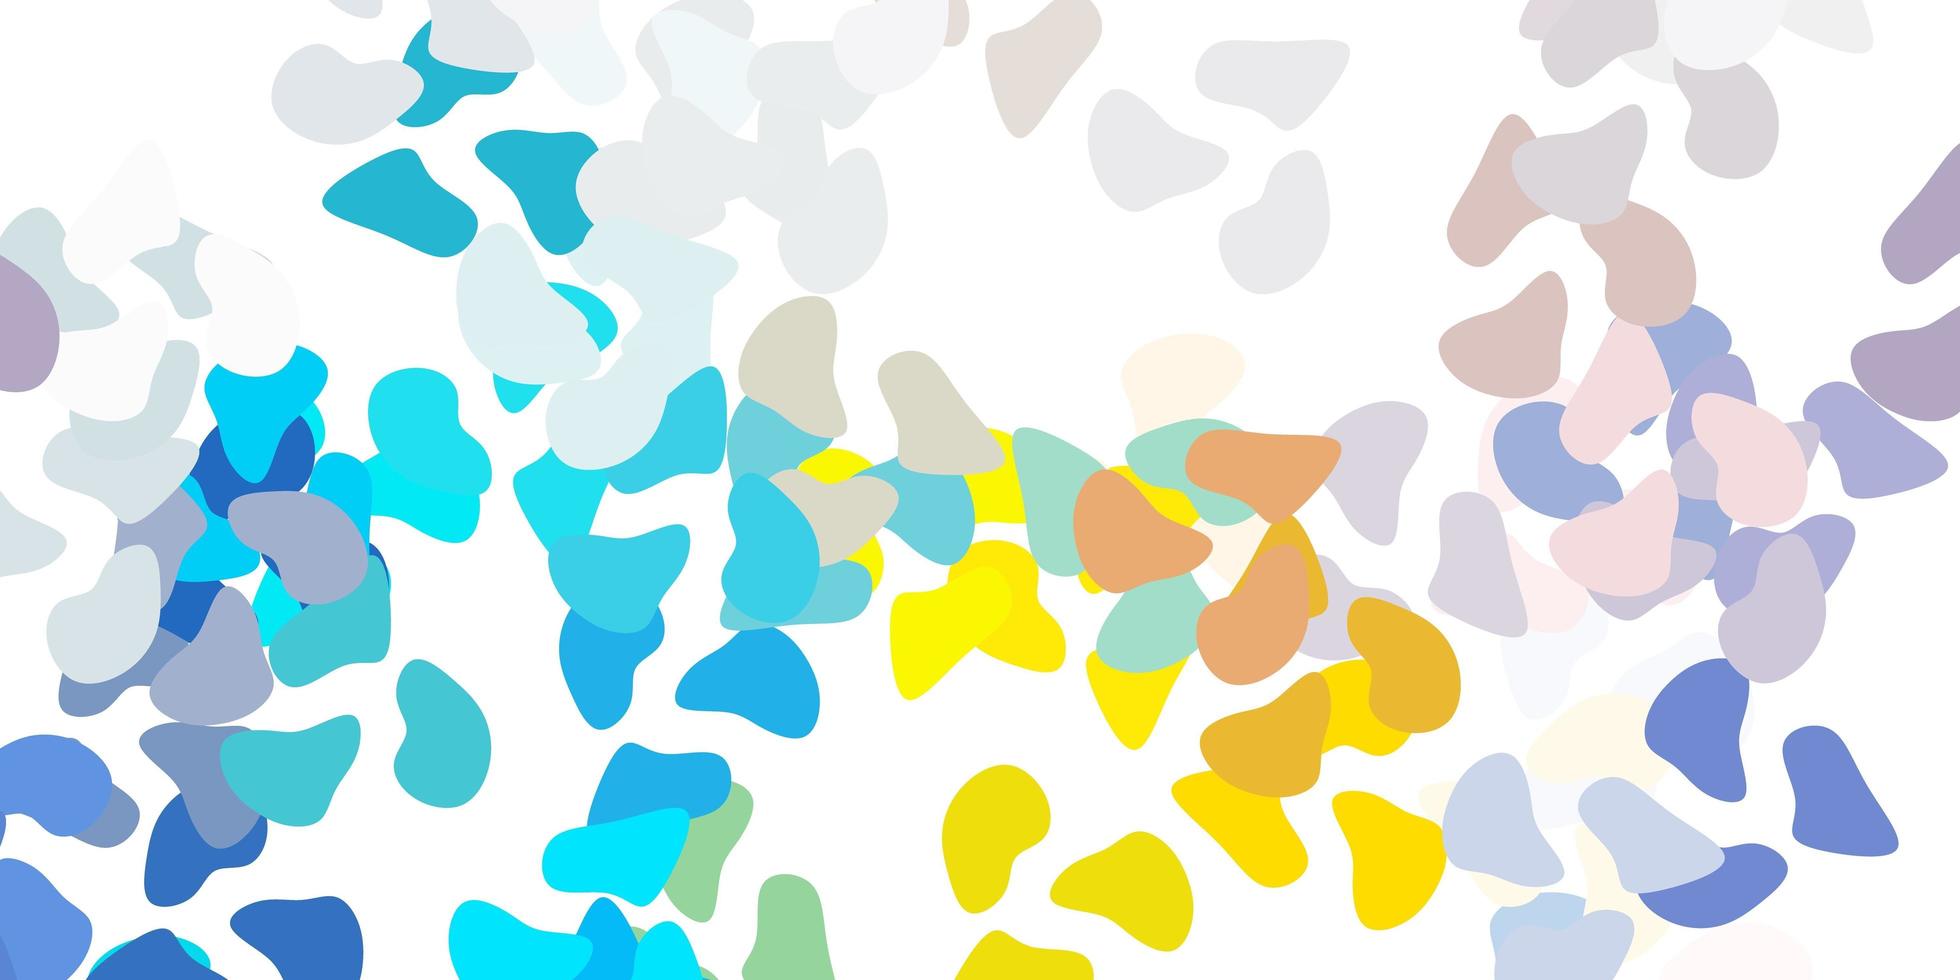 Light blue, yellow vector backdrop with chaotic shapes.